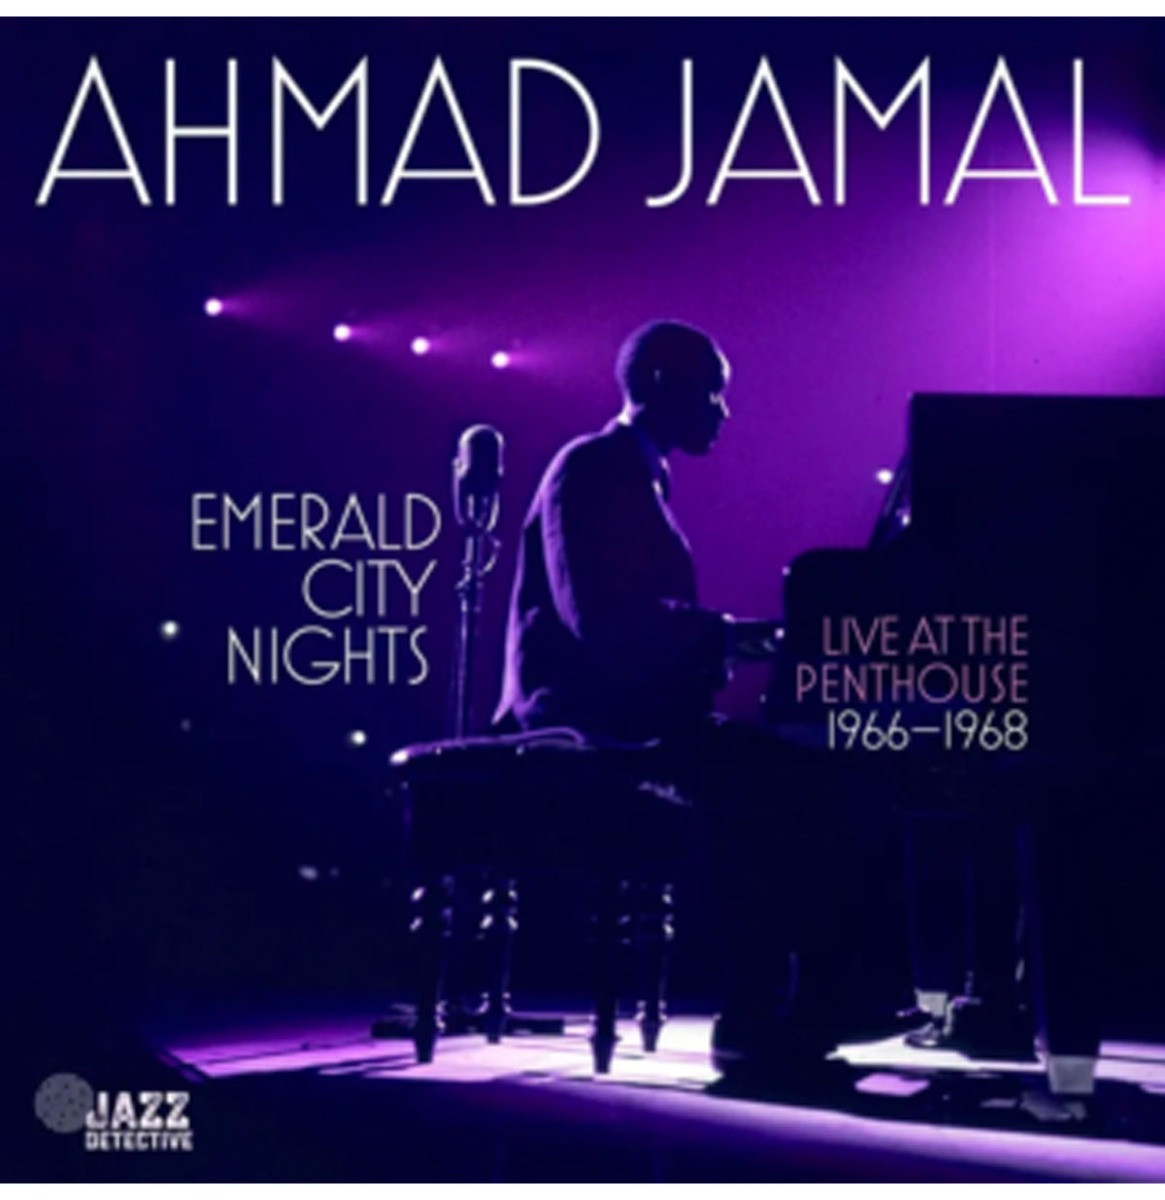 Ahmad Jamal - Emerald City Nights Live At The Penthouse 1966-1968 Vol. 3 (Record Store Day Black Friday 2023) 2LP